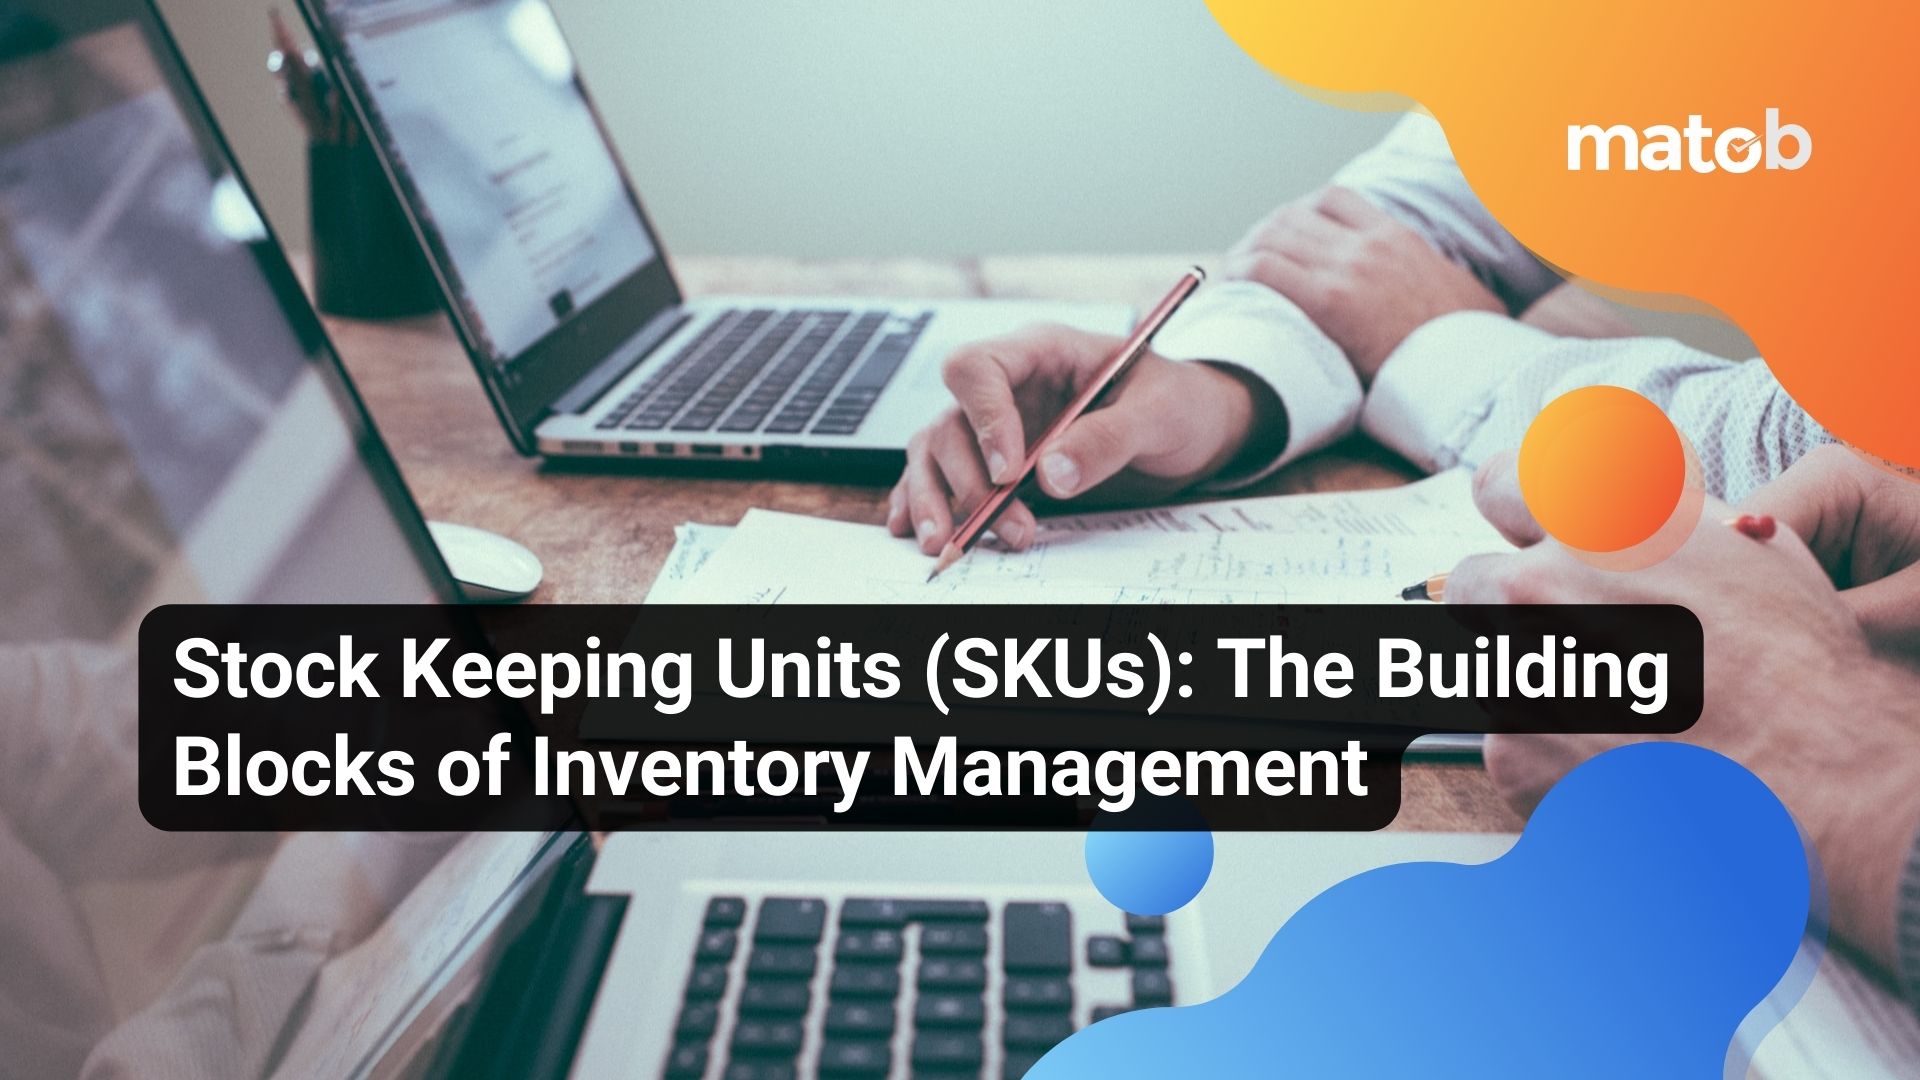 Stock Keeping Units (SKUs): The Building Blocks of Inventory Management